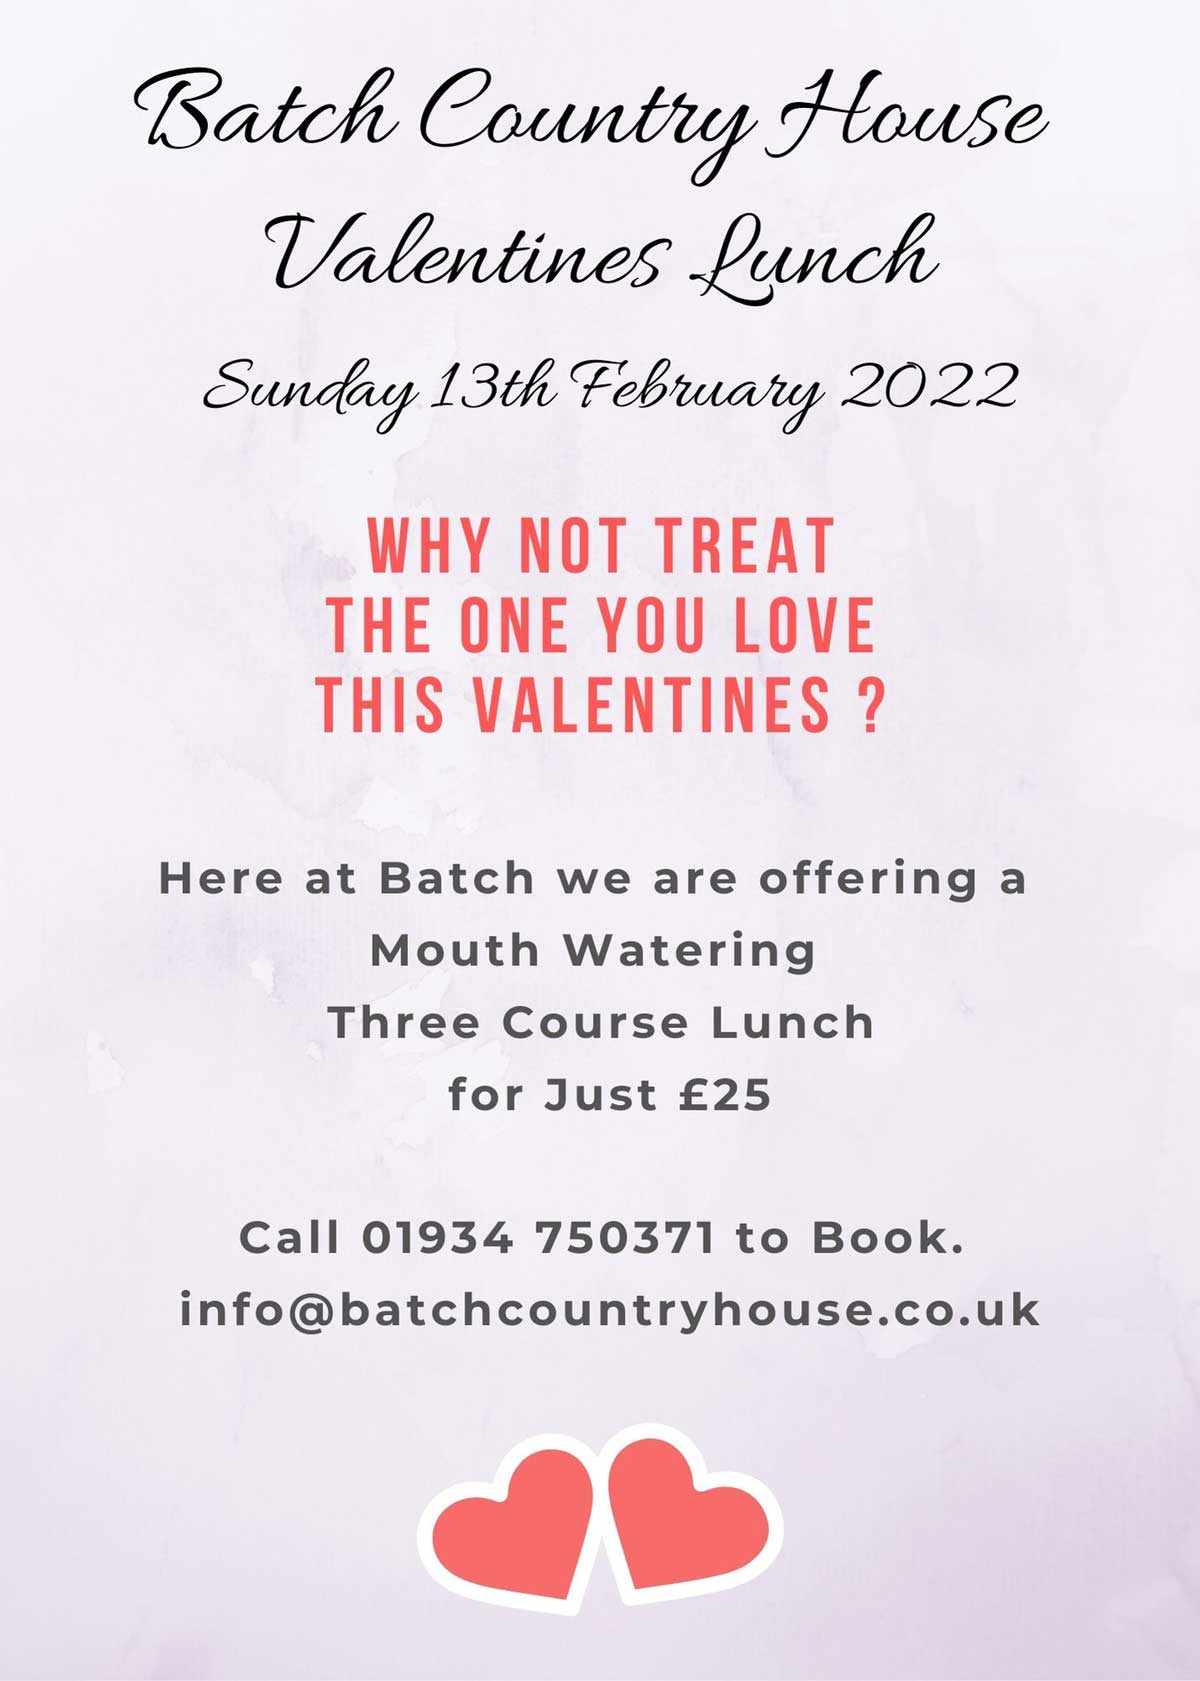 Valentines Day at Batch Country House